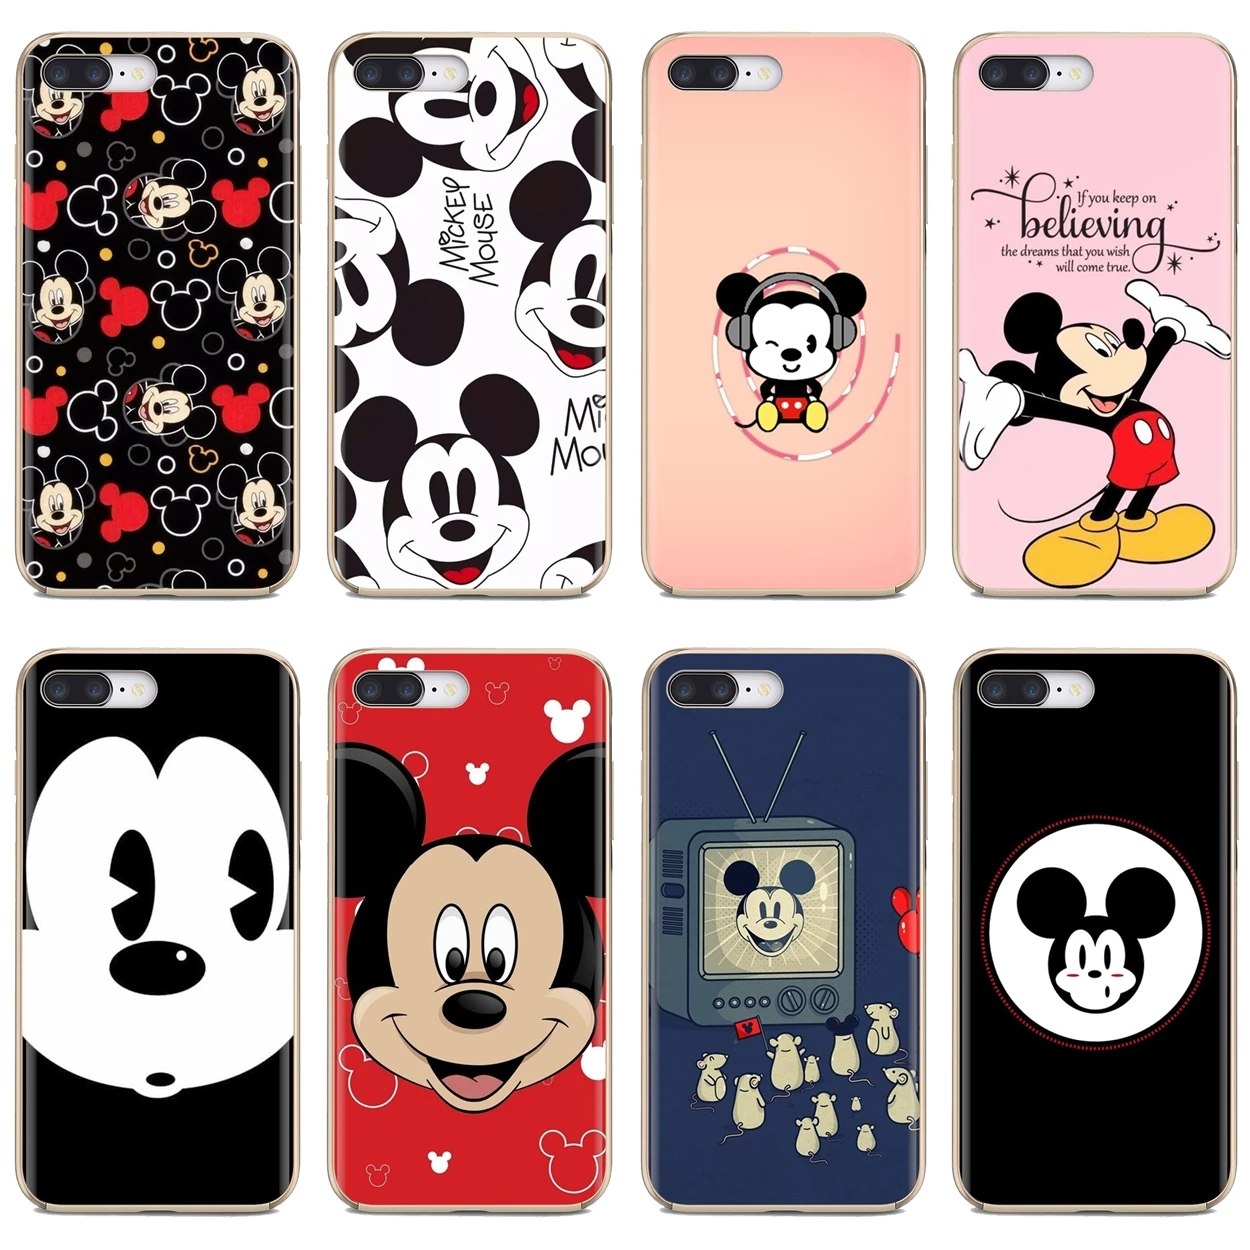 

Soft Silicone Case For iPod Touch iPhone 10 11 12 Pro 4S 5S SE 5C 6 6S 7 8 X XR XS Plus Max 2020 cute cartoon mickey mouse